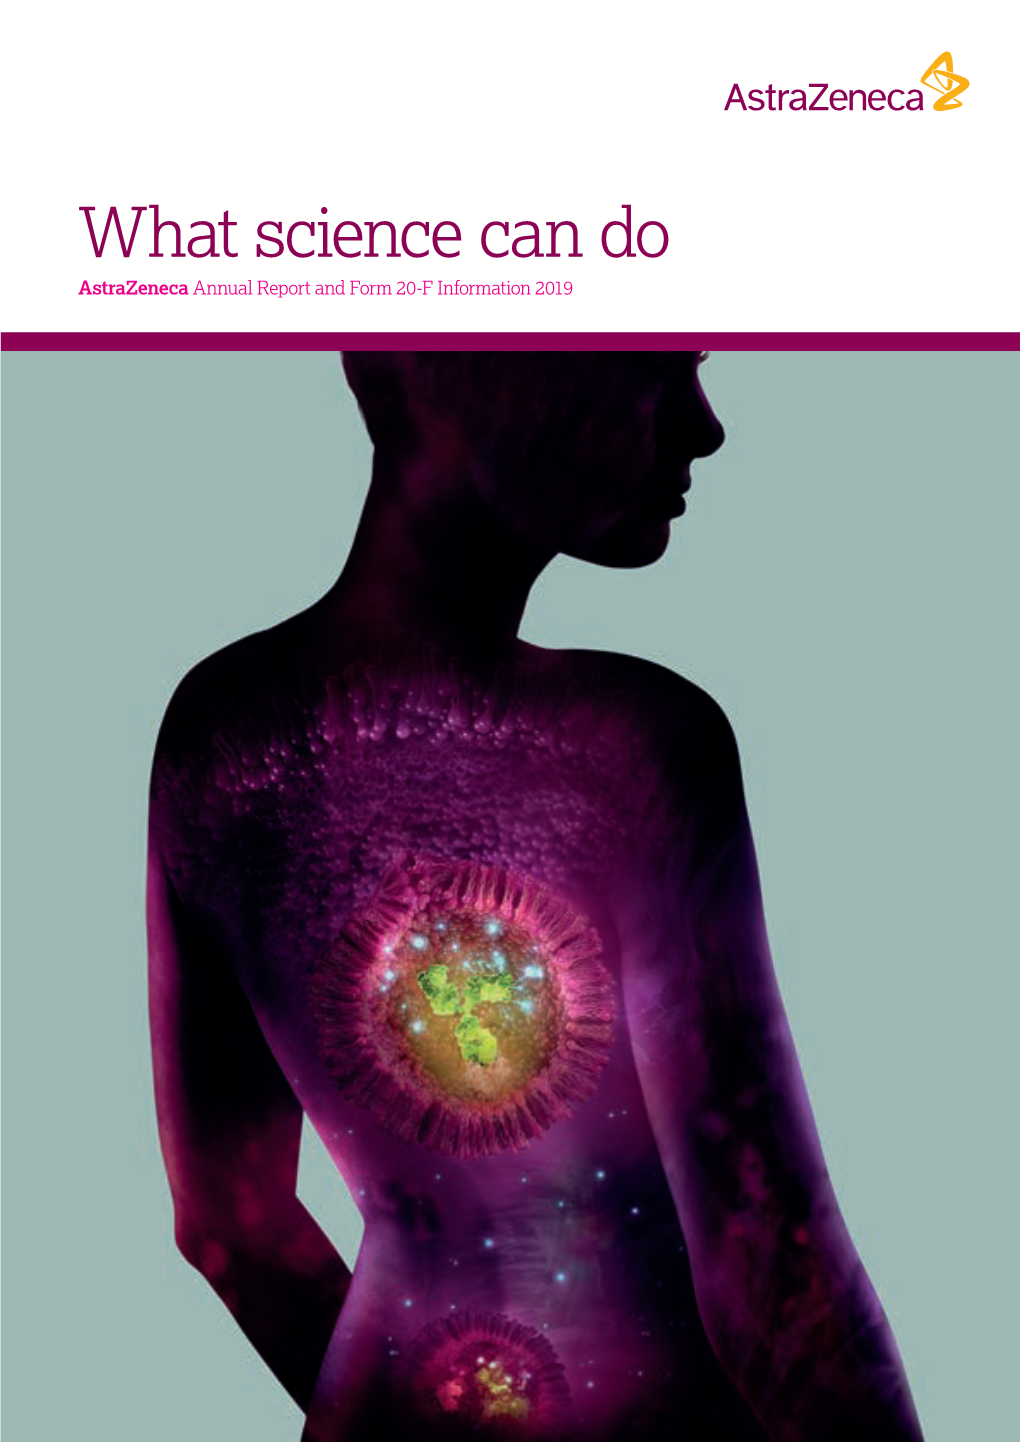 What Science Can Do Astrazeneca Annual Report and Form 20-F Information 2019 Corporate Governance